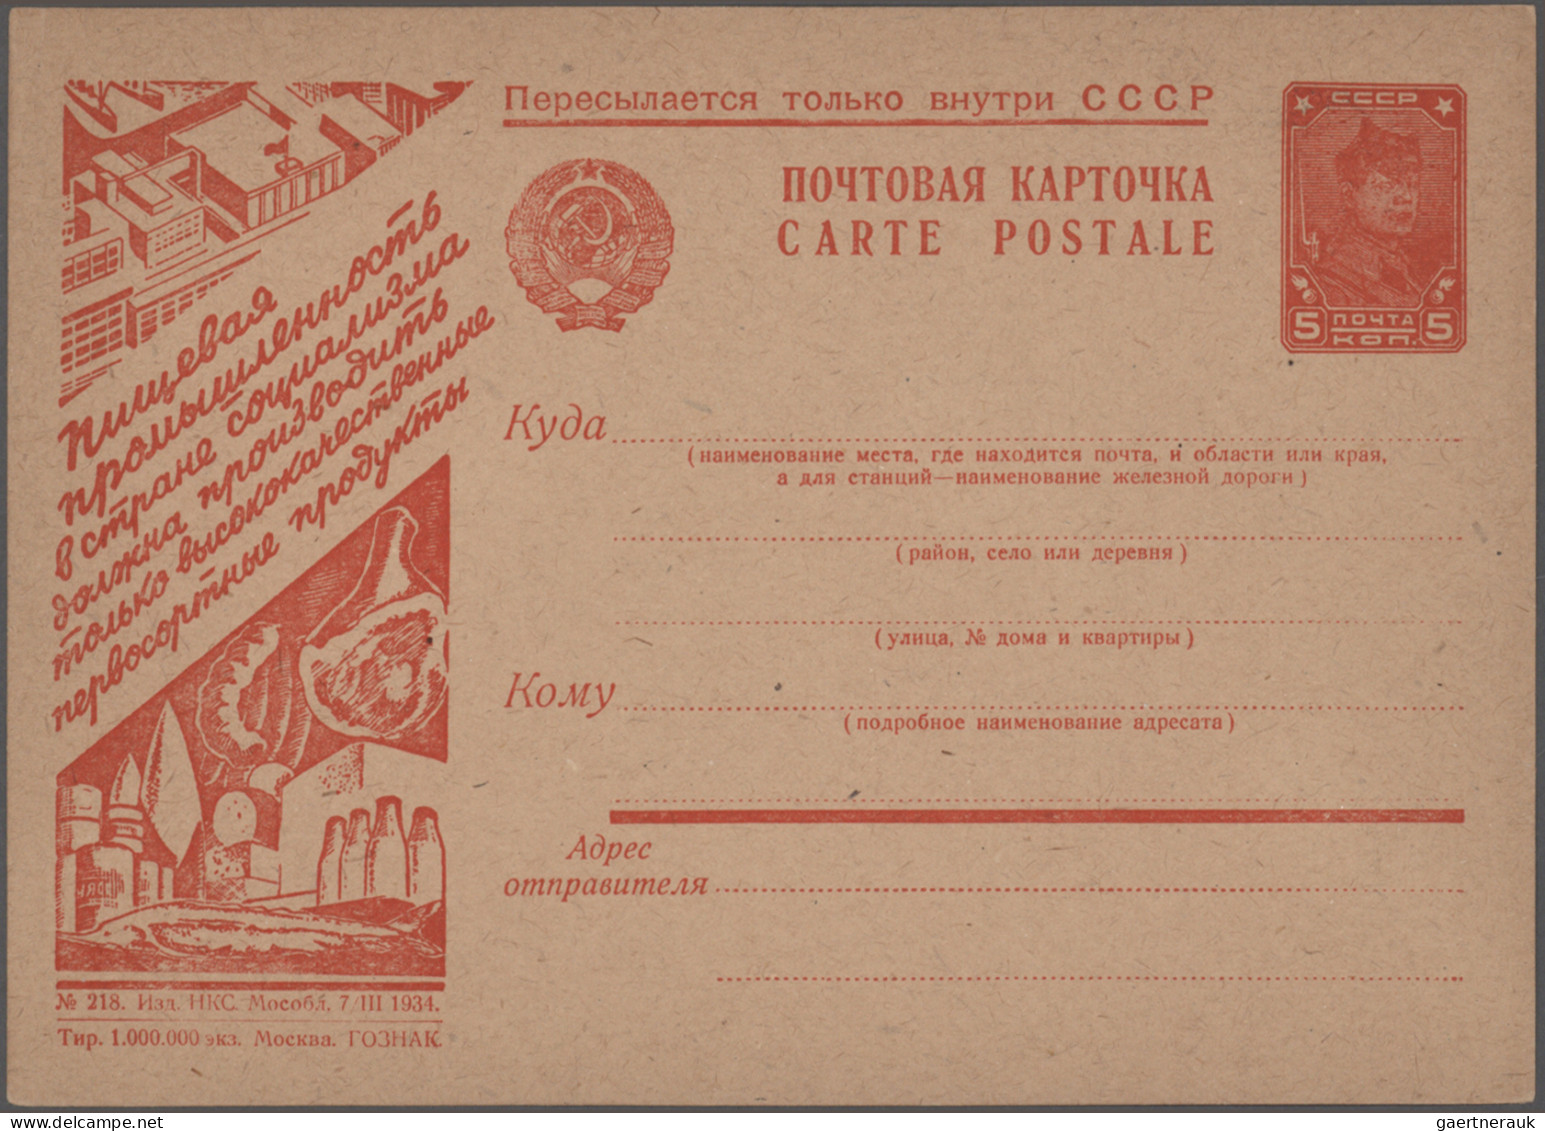 Sowjet Union - Postal Stationery: 1923-1967 Comprehensive and very specialized c